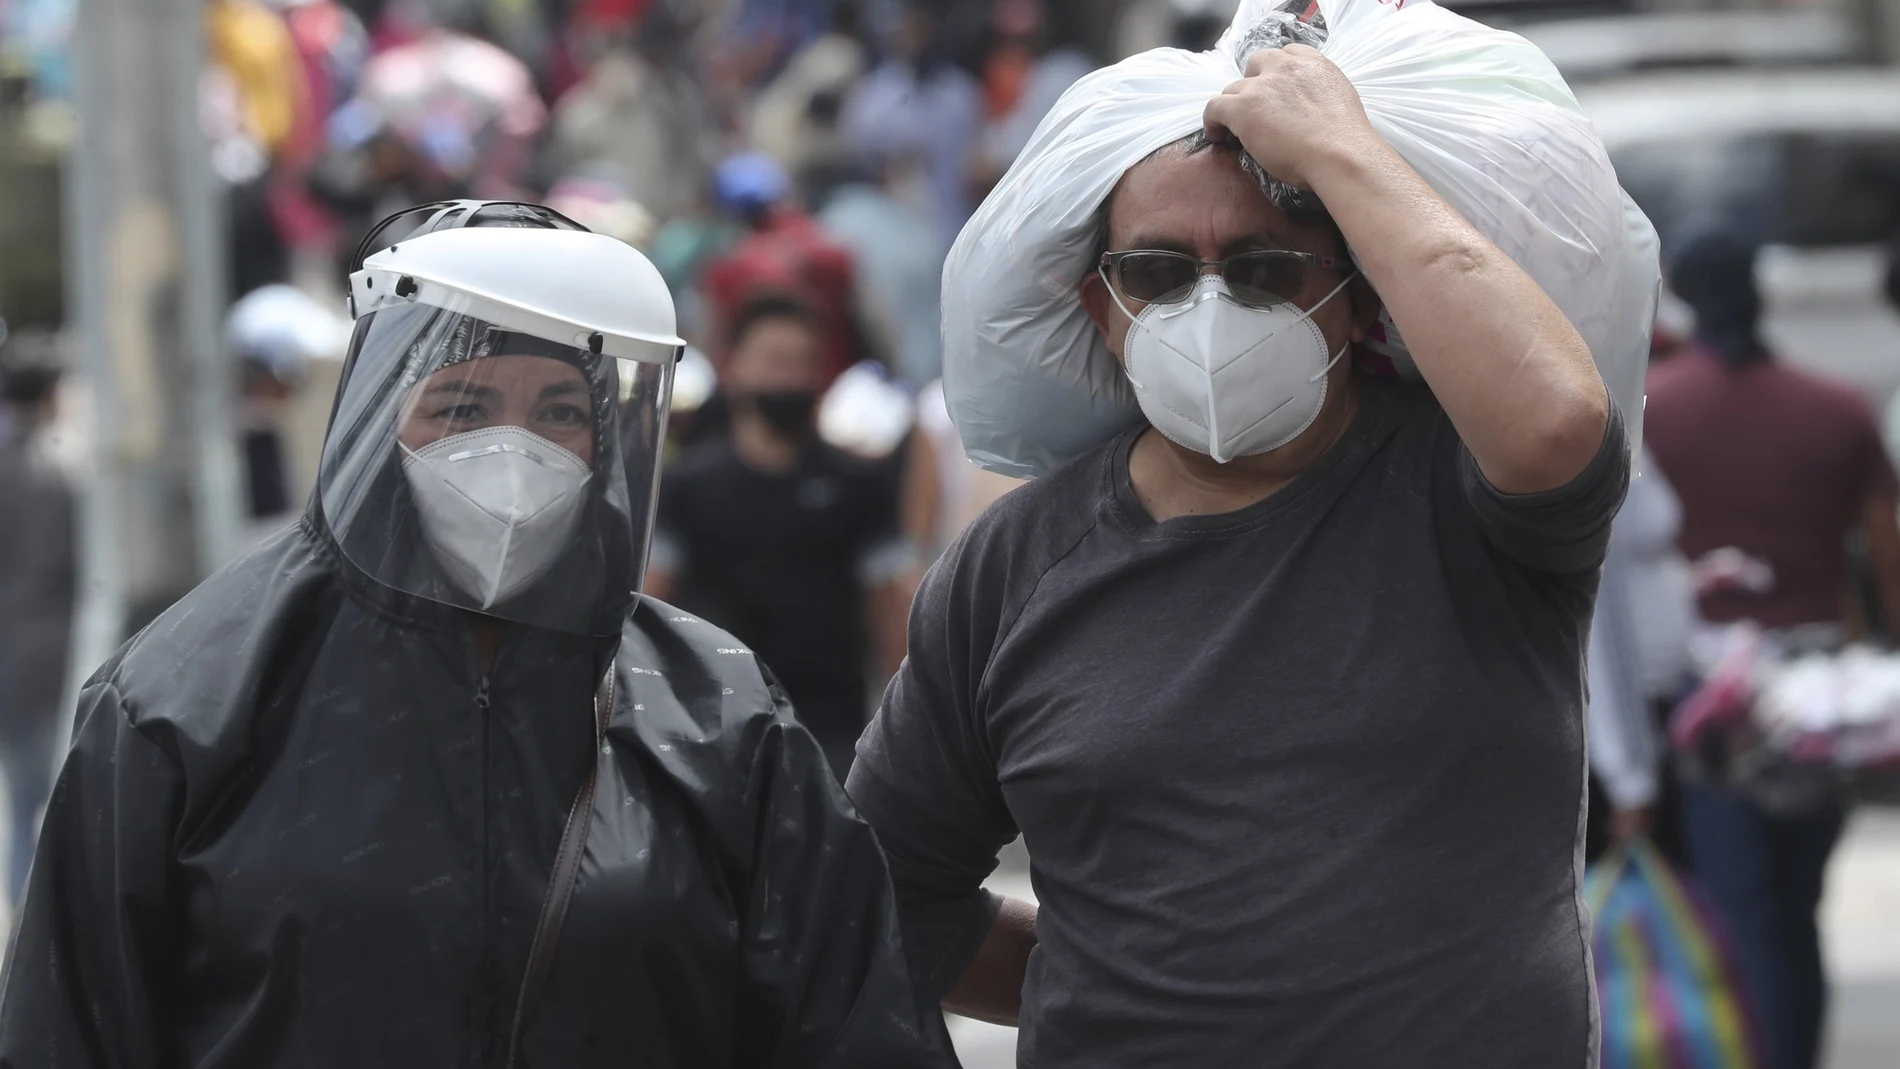 People wearing masks and face shields walk in the capital's downtown amid the new coronavirus pandemic in Quito, Ecuador, Monday, June 29, 2020. (AP Photo/Dolores Ochoa)